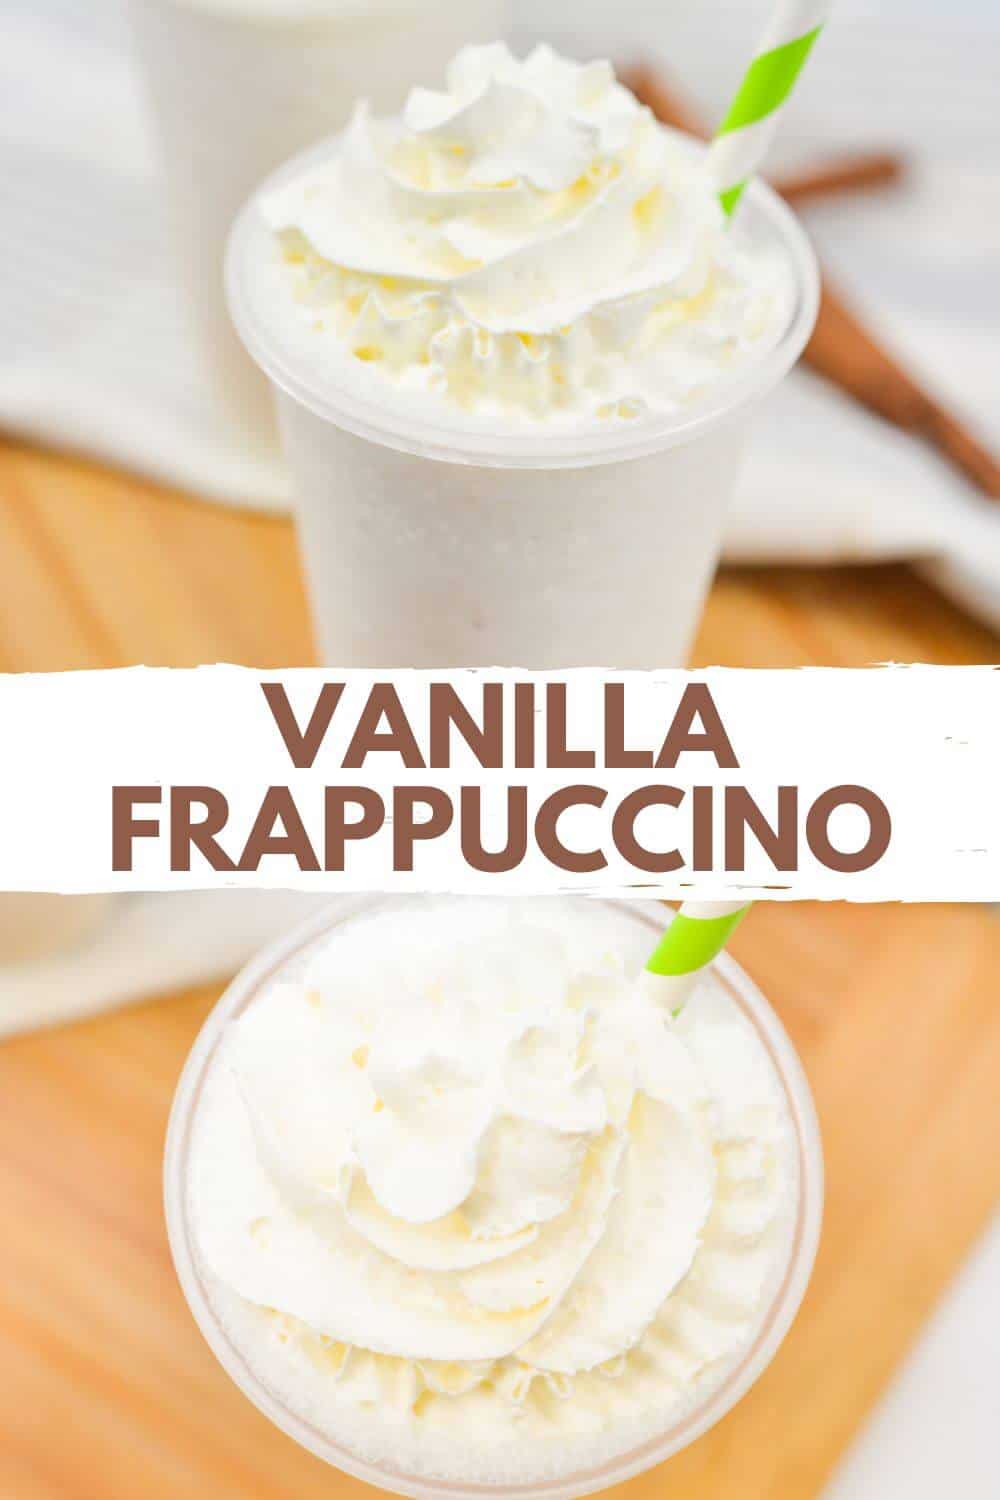 Vanilla bean frappuccino with recipe title text overlay.